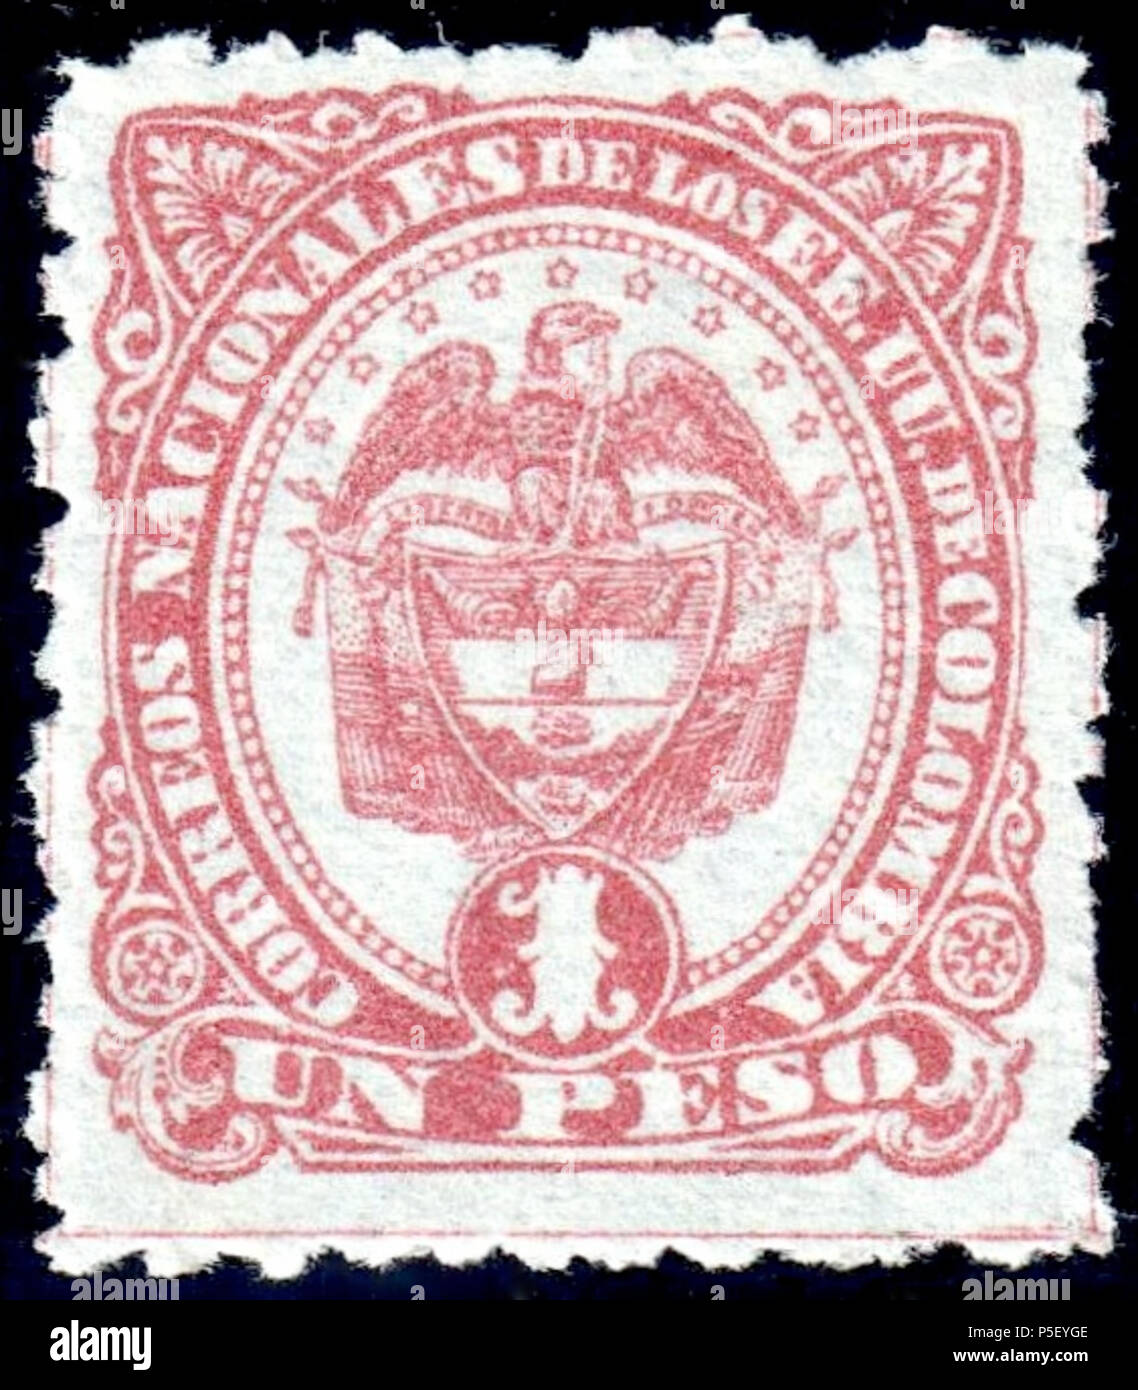 N/A. English: Colombia 1883 1p claret on bluish, unused. Catalogue: Sc. 123, Mi. 84A Paper: Bluish wove unwtmk Perforation: 10.5 to 13.5 Printing: Lithography Printer: D. Paredes Printing Ltd, Bogota . 1883. Colombian government 367 Colombia 1883 Sc123 Stock Photo